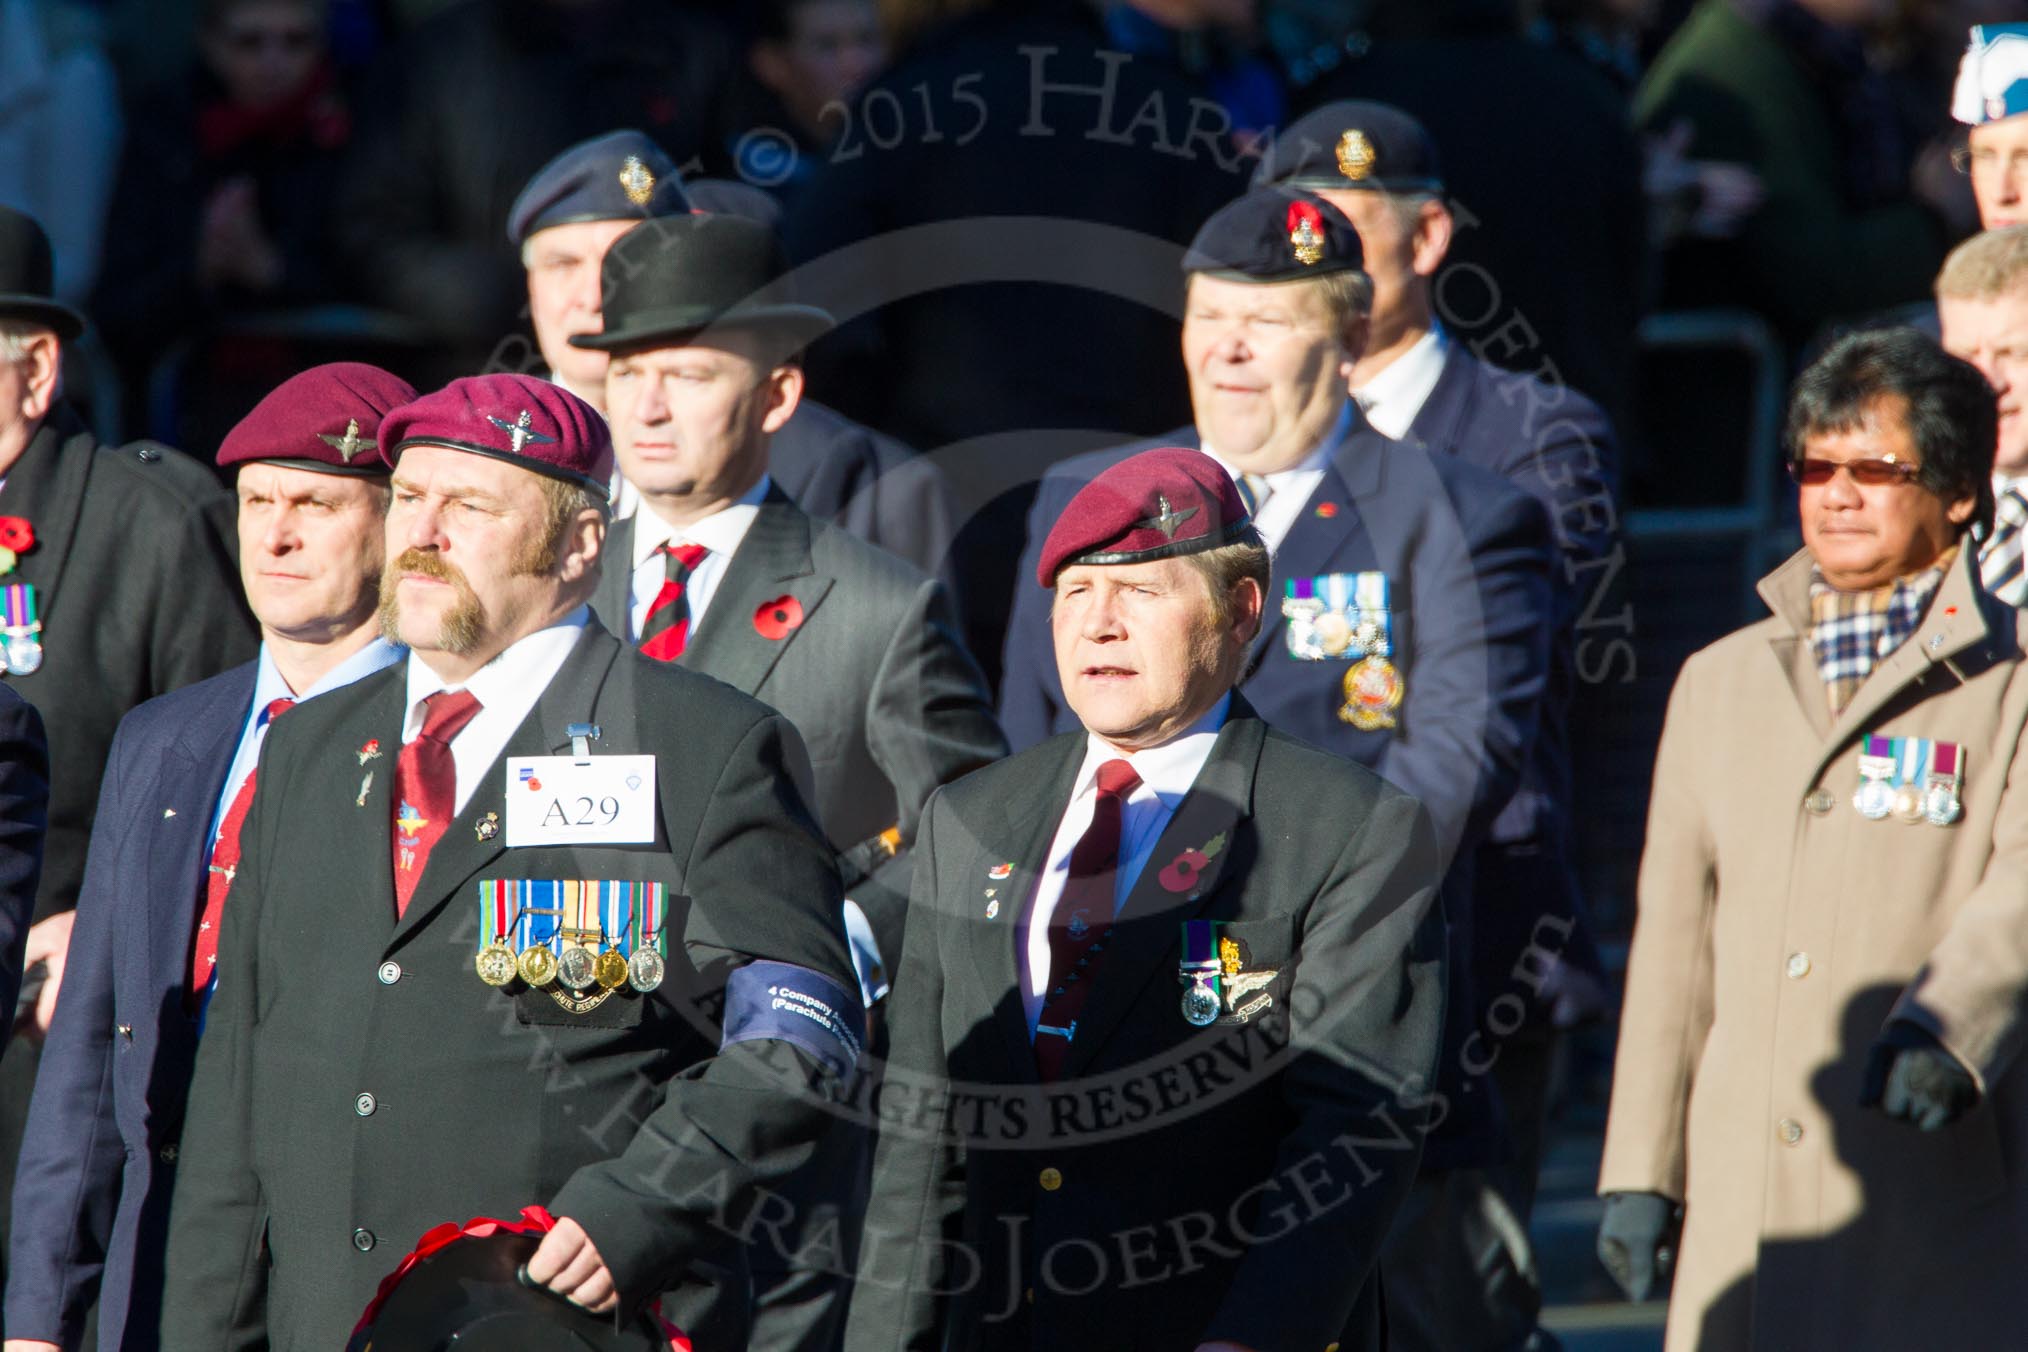 Remembrance Sunday Cenotaph March Past 2013: A29 - 4 Company Association (Parachute Regiment)..
Press stand opposite the Foreign Office building, Whitehall, London SW1,
London,
Greater London,
United Kingdom,
on 10 November 2013 at 11:58, image #1265